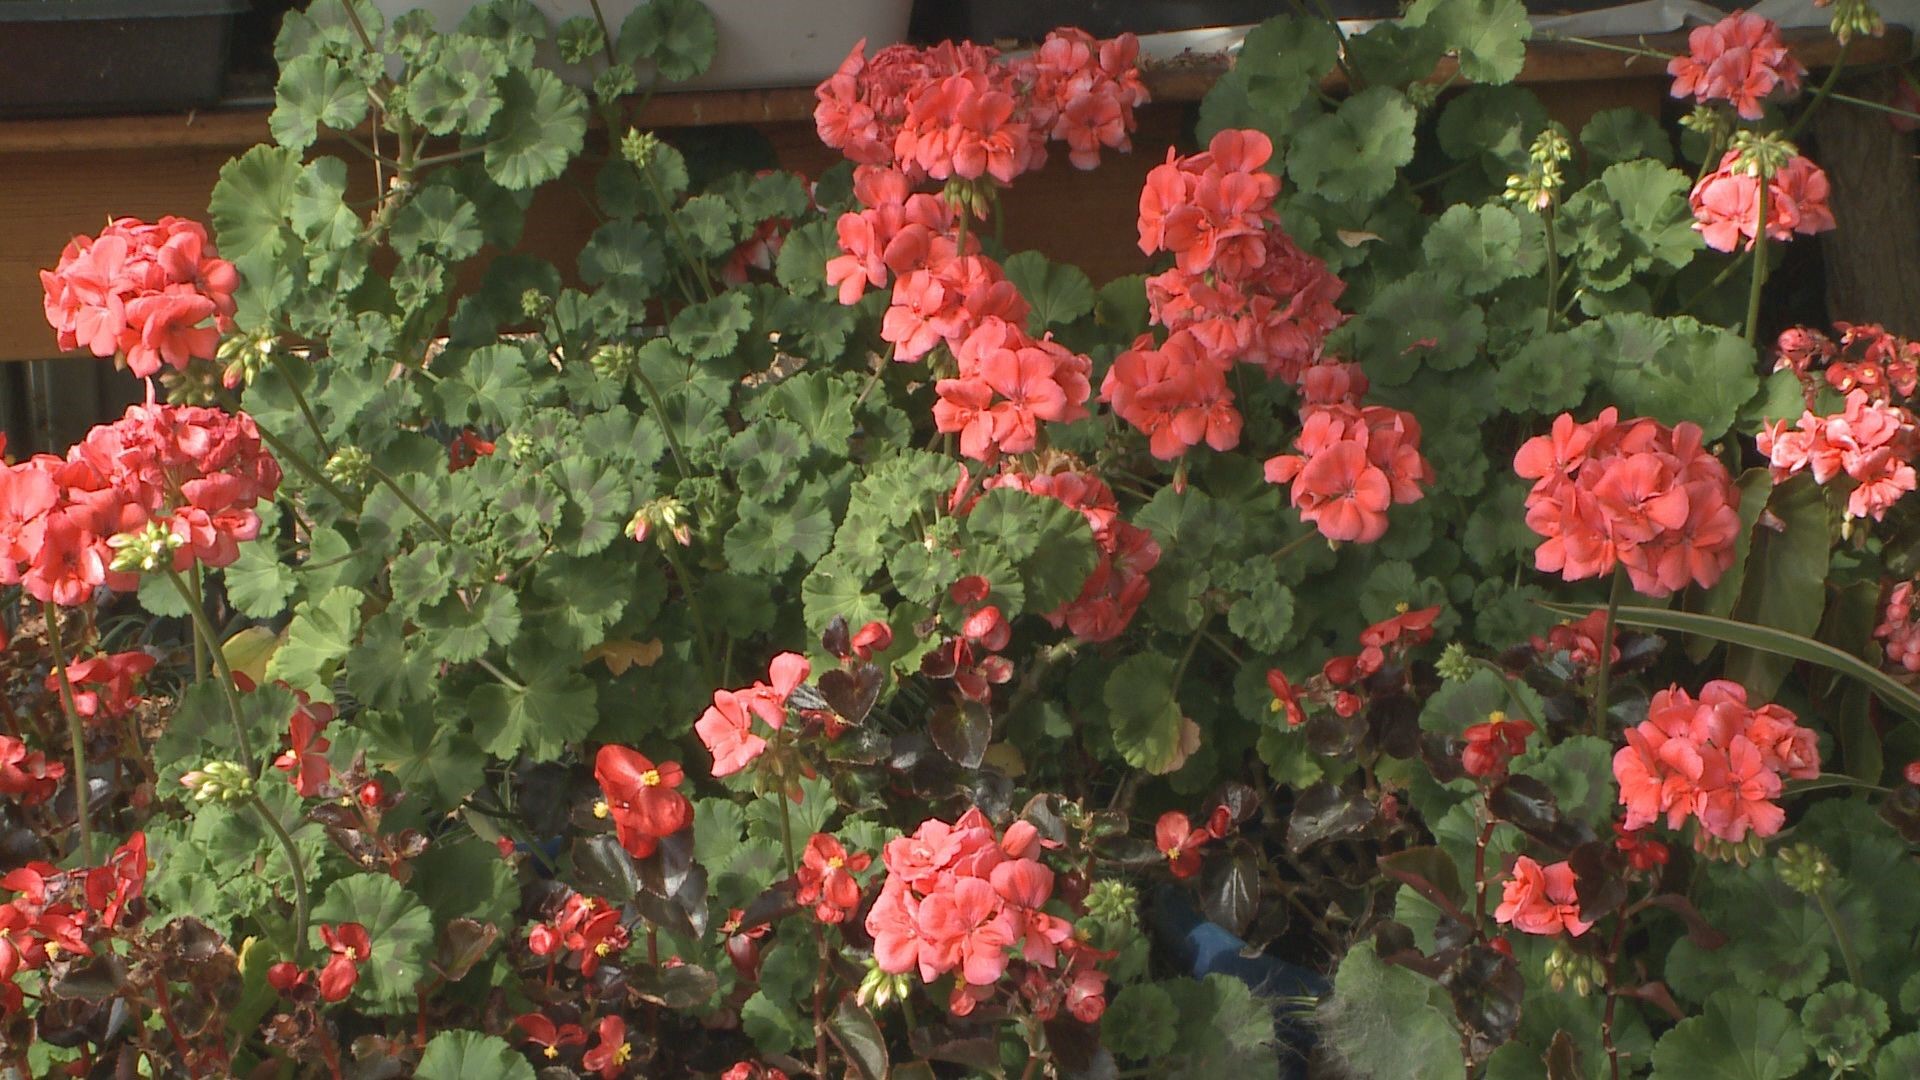 It is almost spring and that means it's time to get your geraniums ready to go outside.